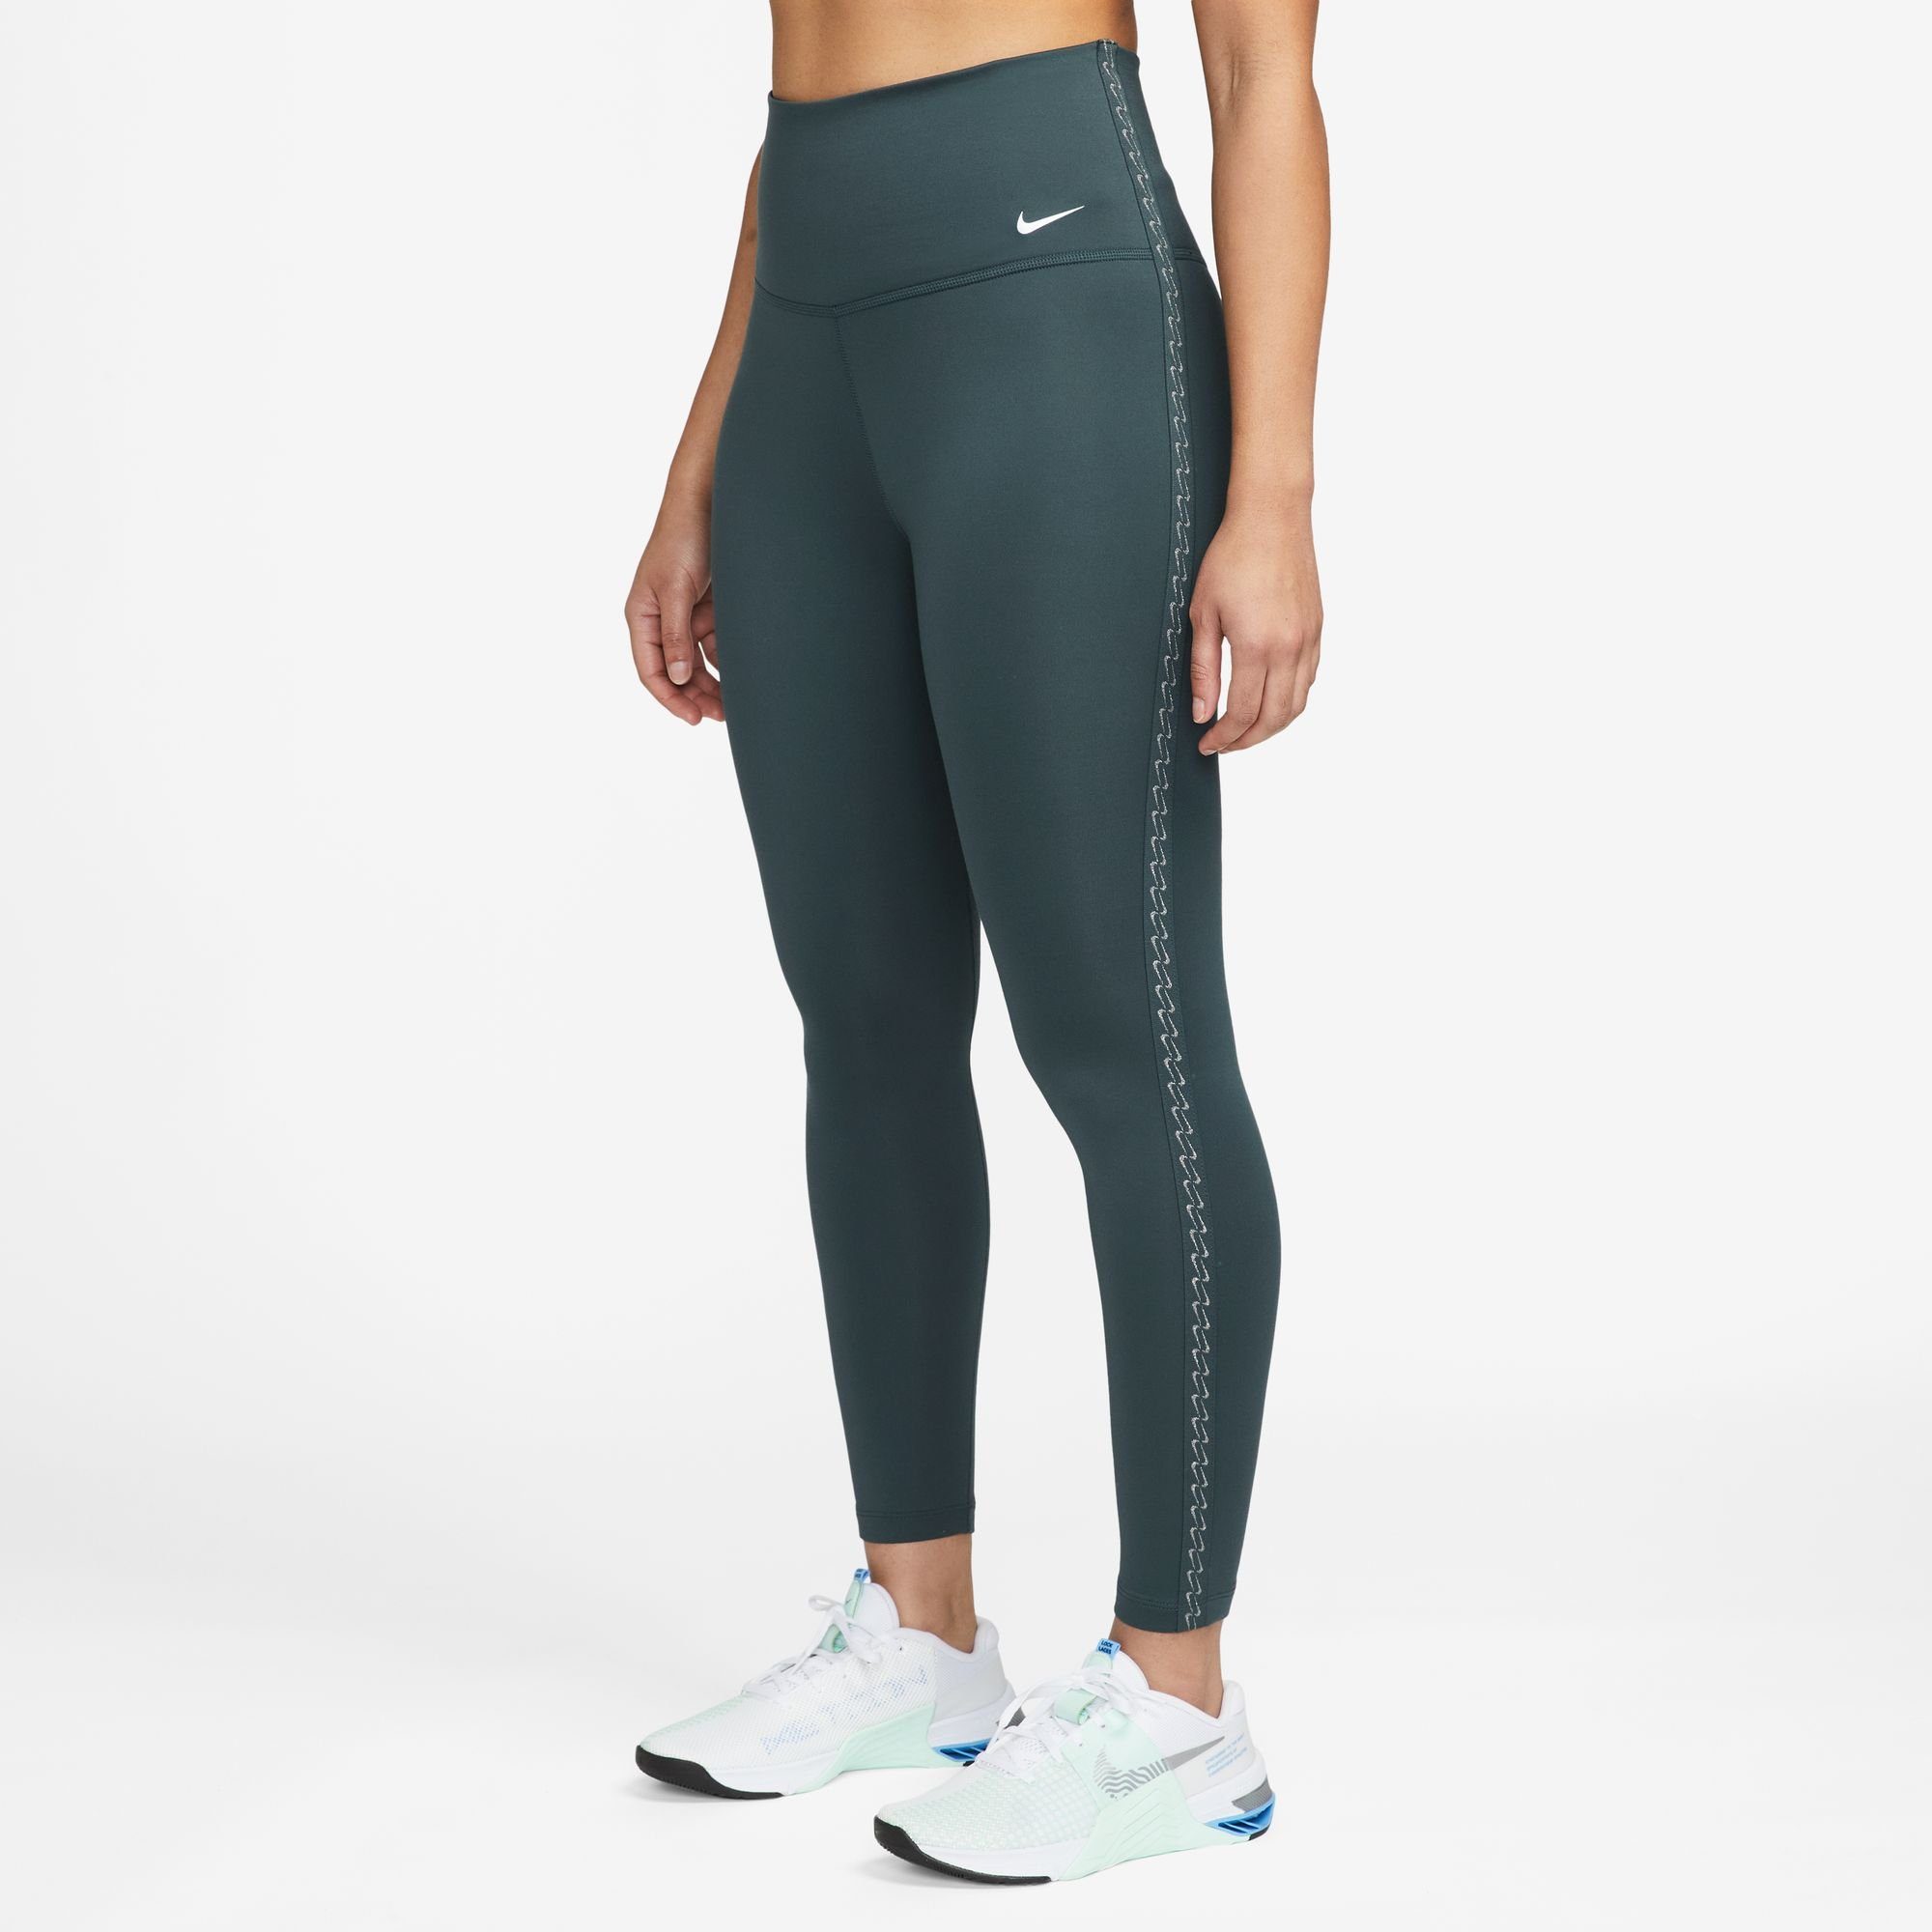 DEEP LEGGINGS / Nike JUNGLE/WHITE ONE Trainingstights WOMEN'S THERMA-FIT HIGH-WAISTED